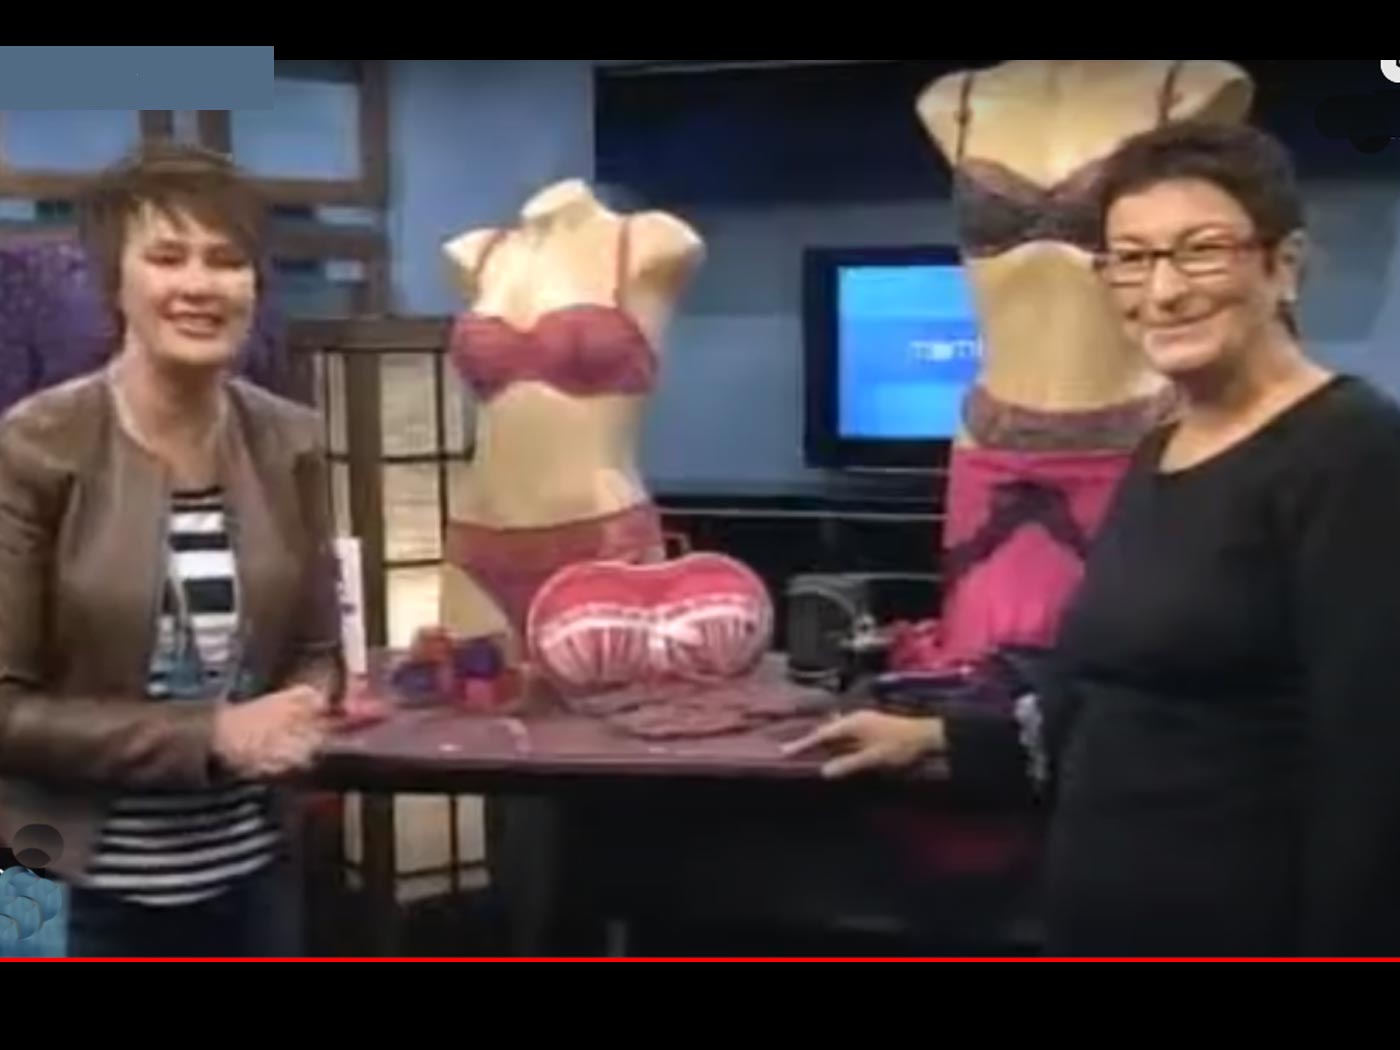 CH Morning Live “Valentine’s Day Lingerie for Couples” Media Coverage